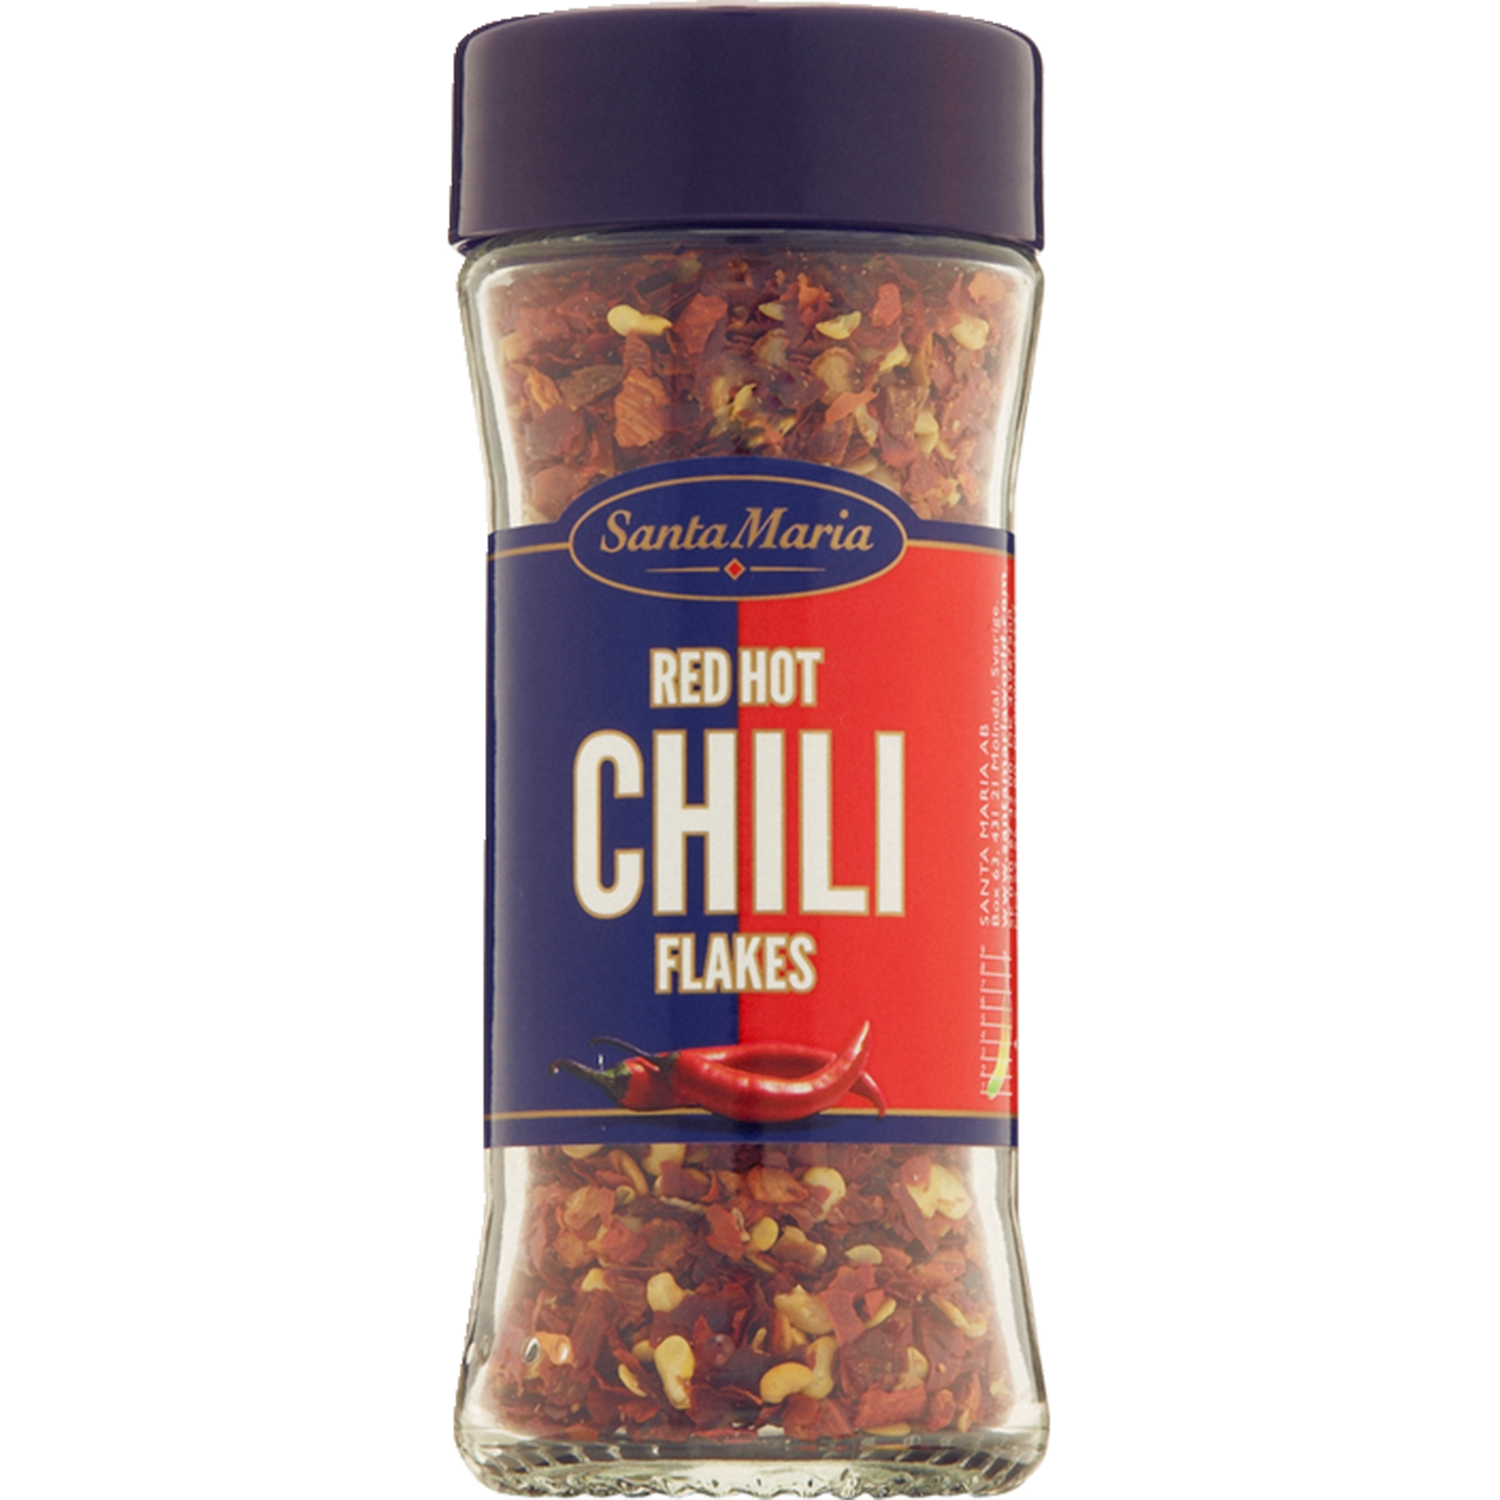 Chili Flakes Png If You Like You Can Download Pictures In Icon Format Or Bmp User